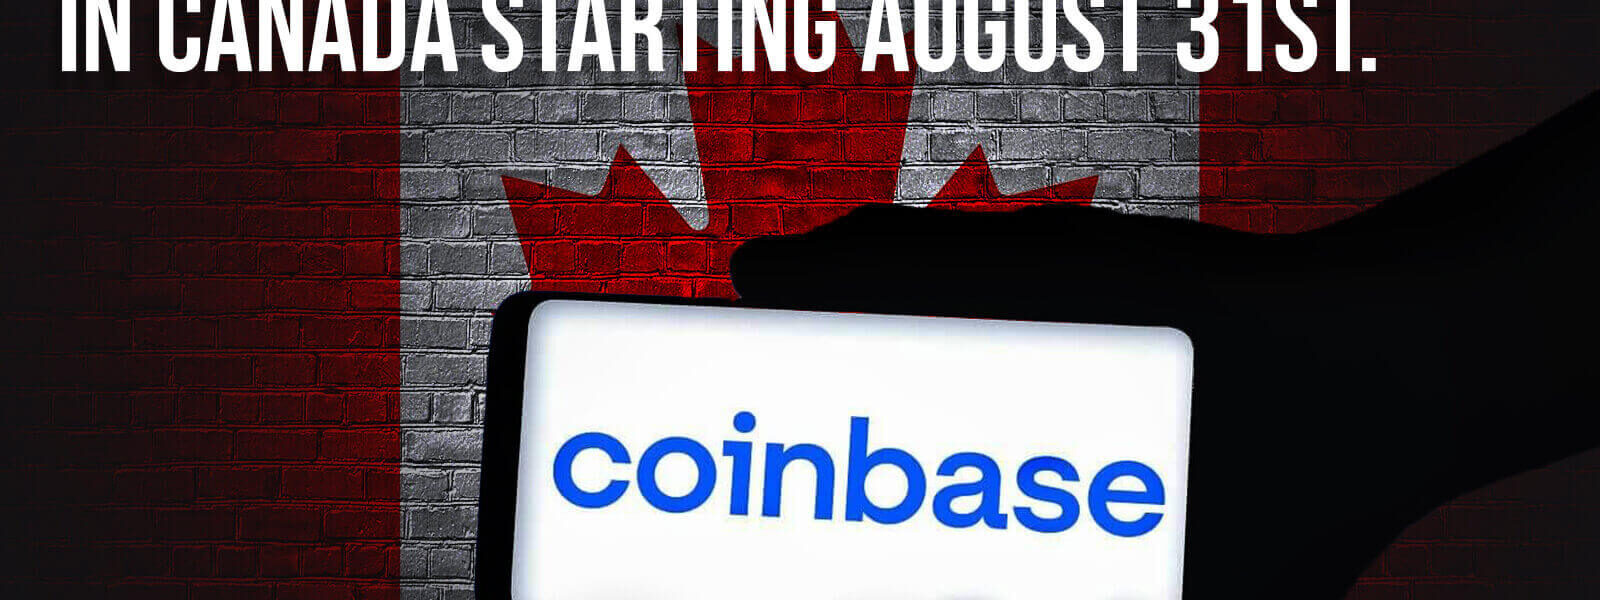 Coinbase to Halt USDT Trading in Canada Starting August 31st.